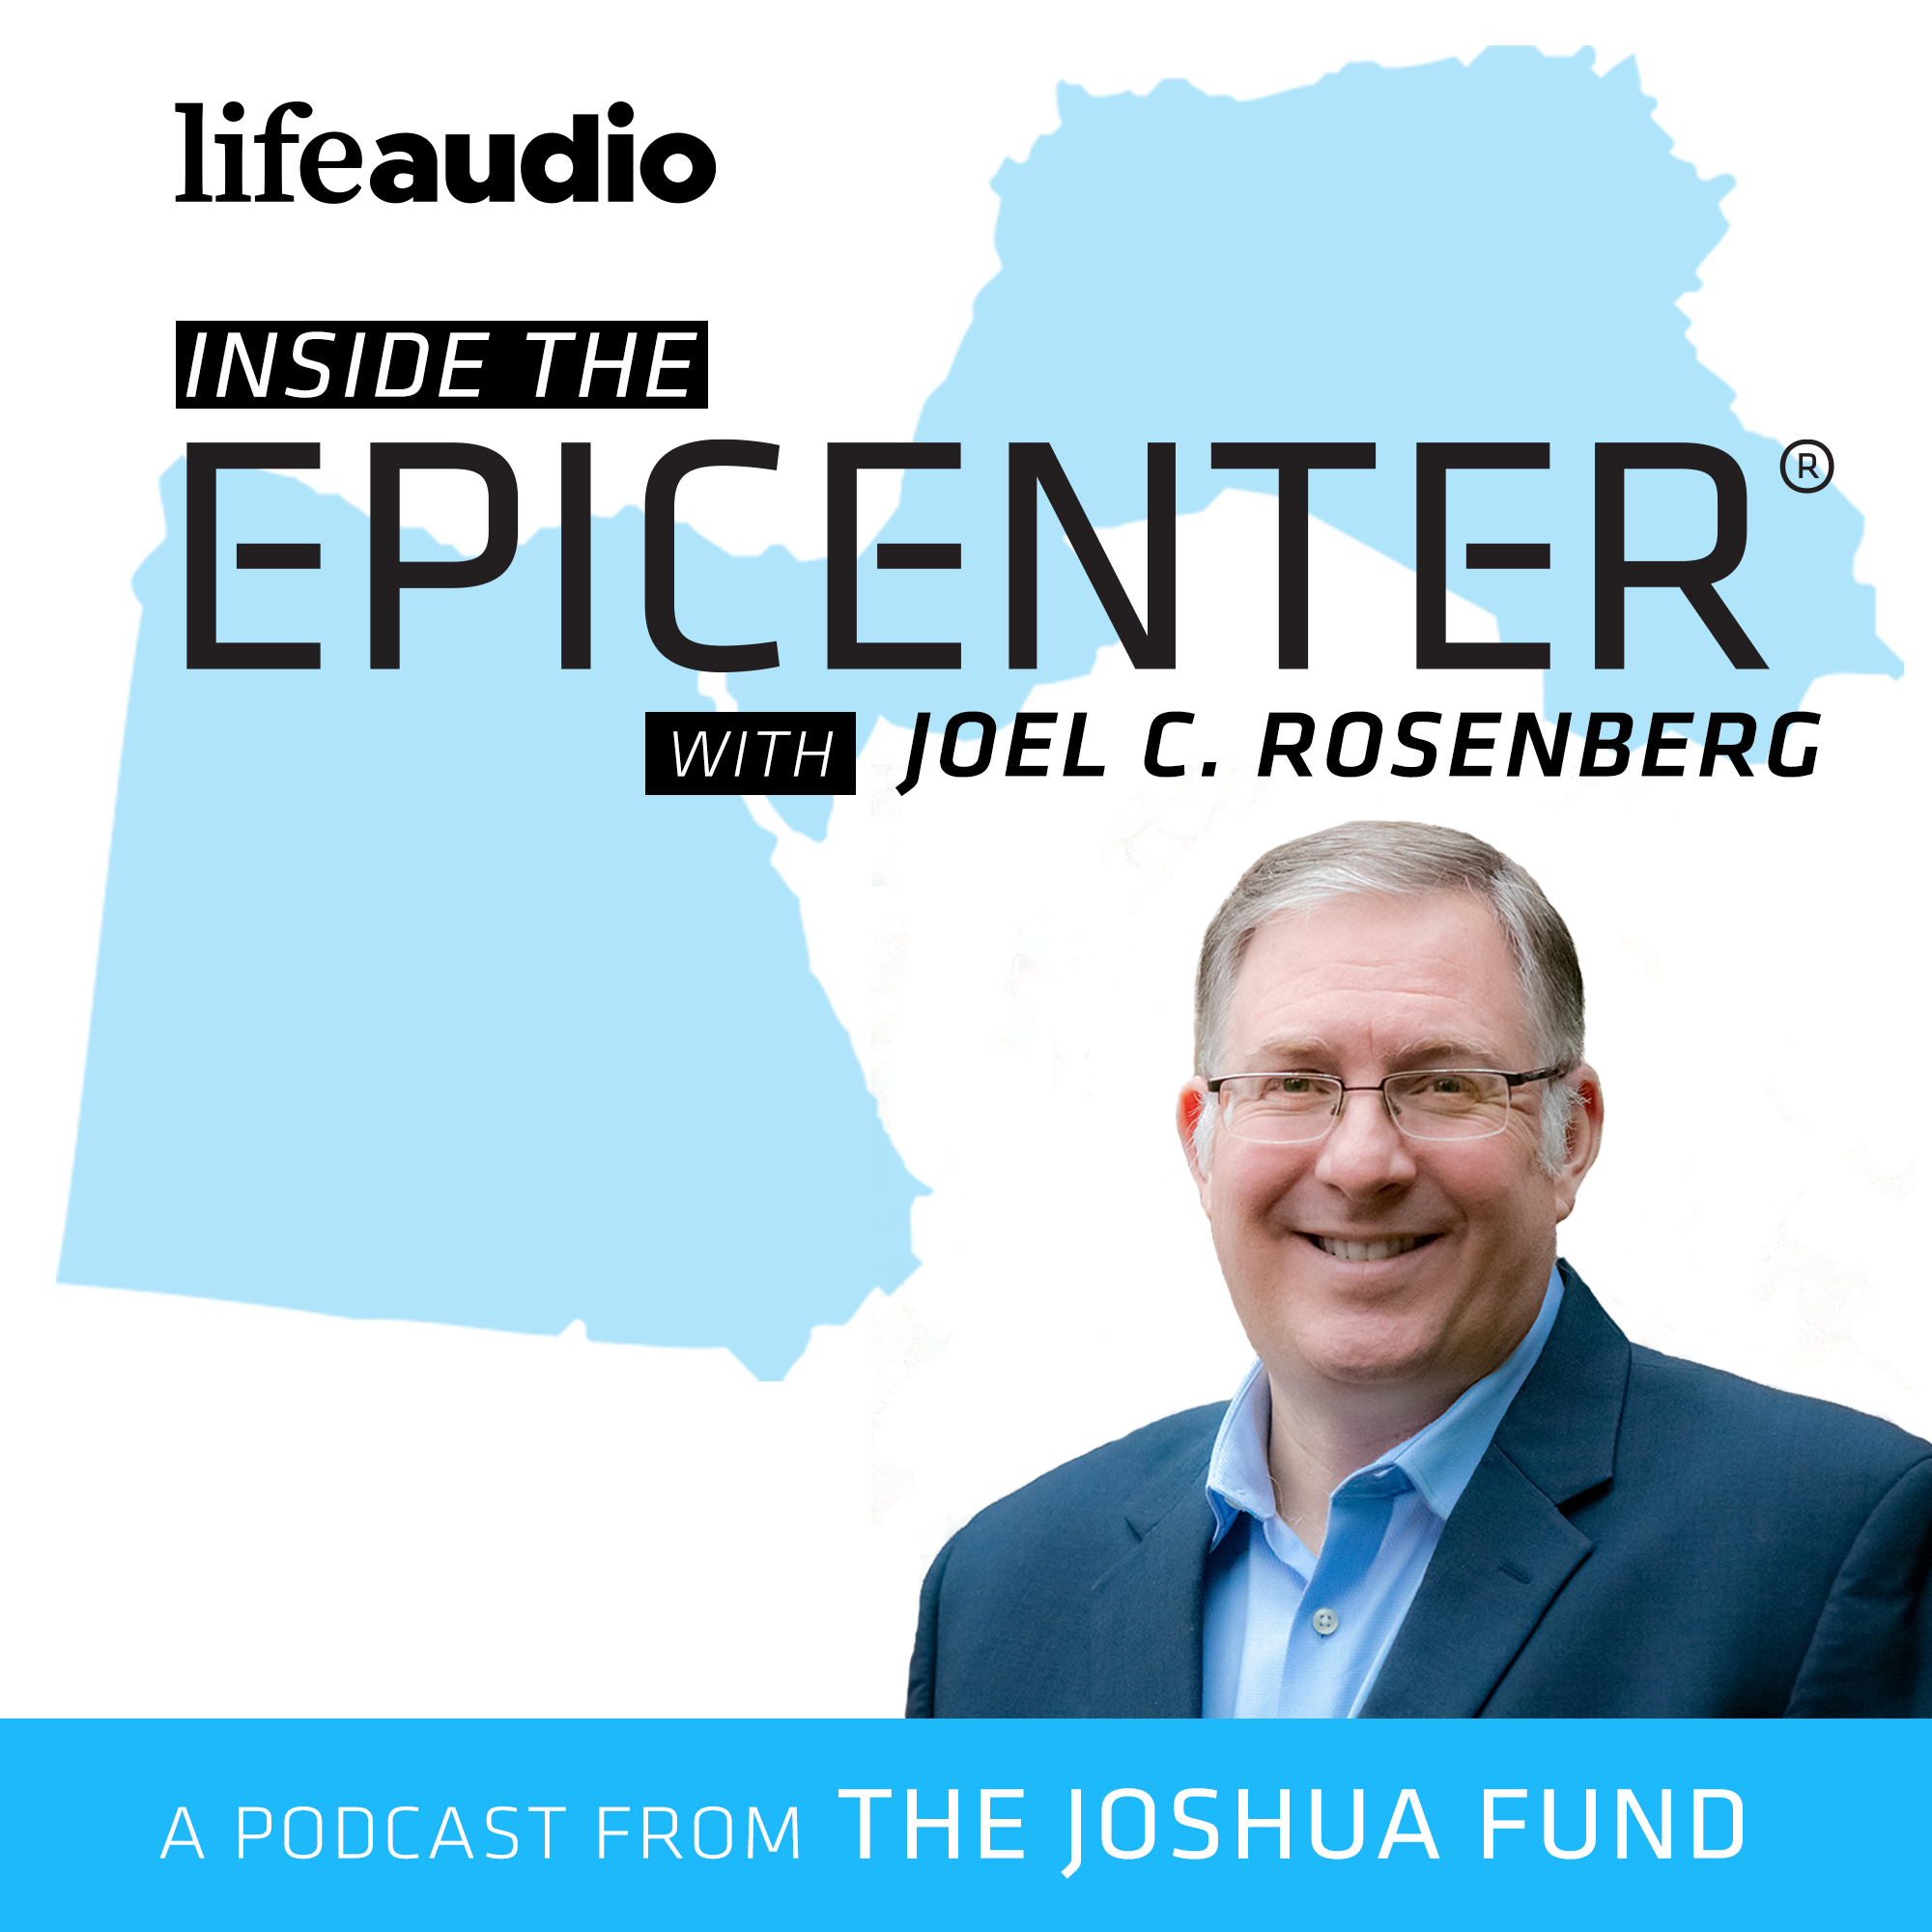 LifeAudio Guest Feature: Is America Imploding or Nearing Another Great Awakening? |  Inside the Epicenter